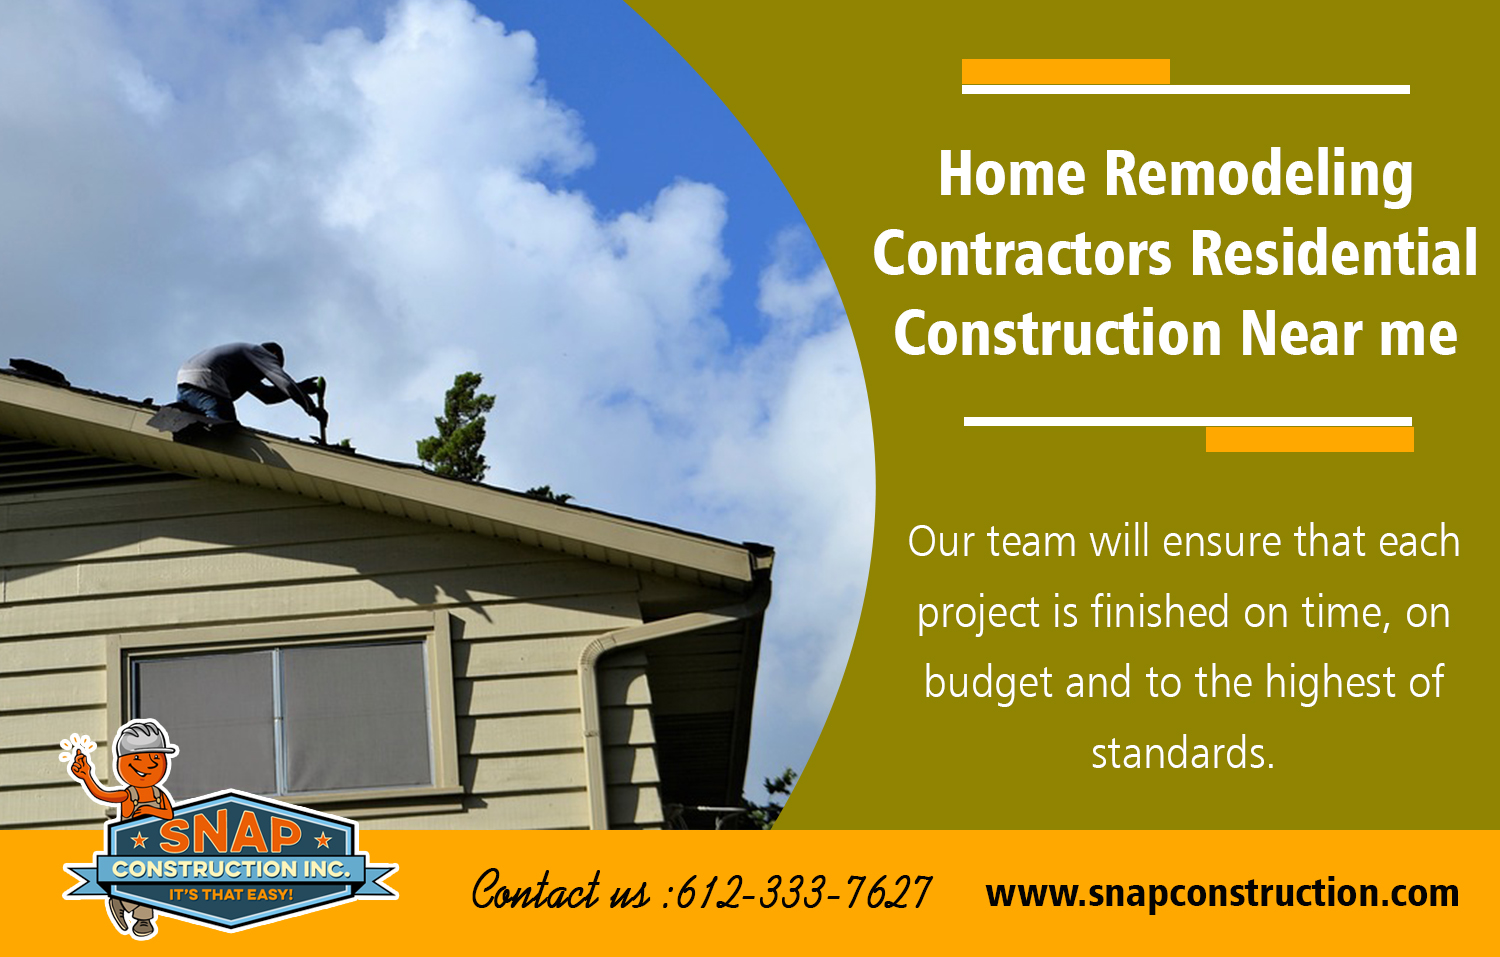 Home Remodeling Contractors Residential Construction Near me - ImgPaste.net